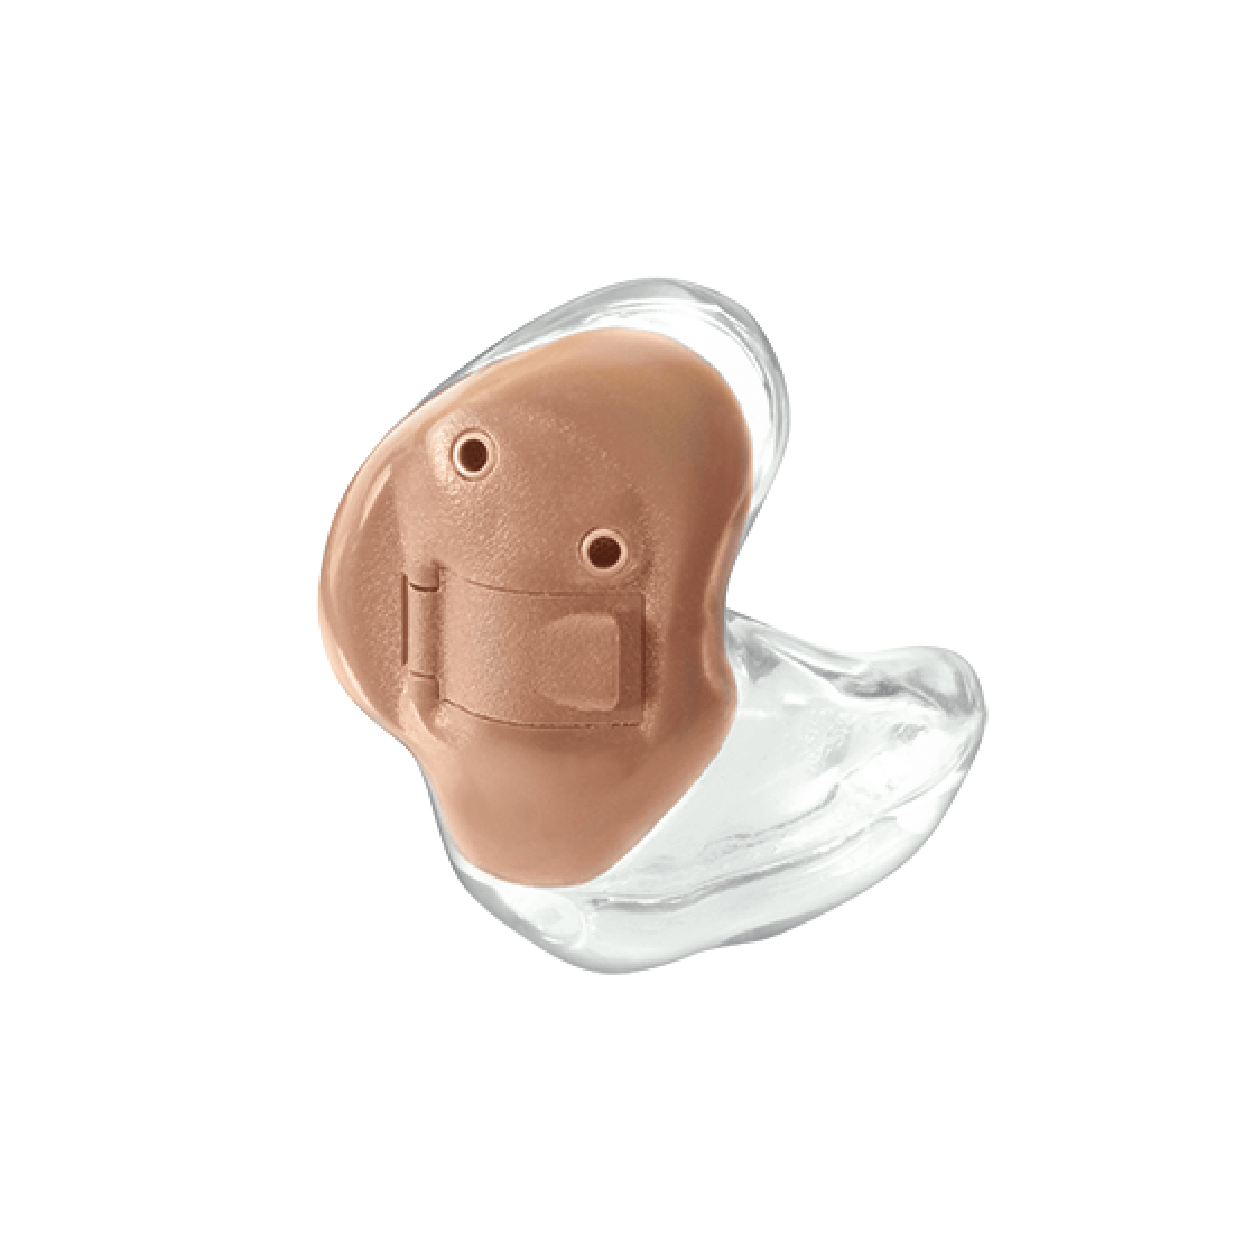 In-the-ear hearing aids